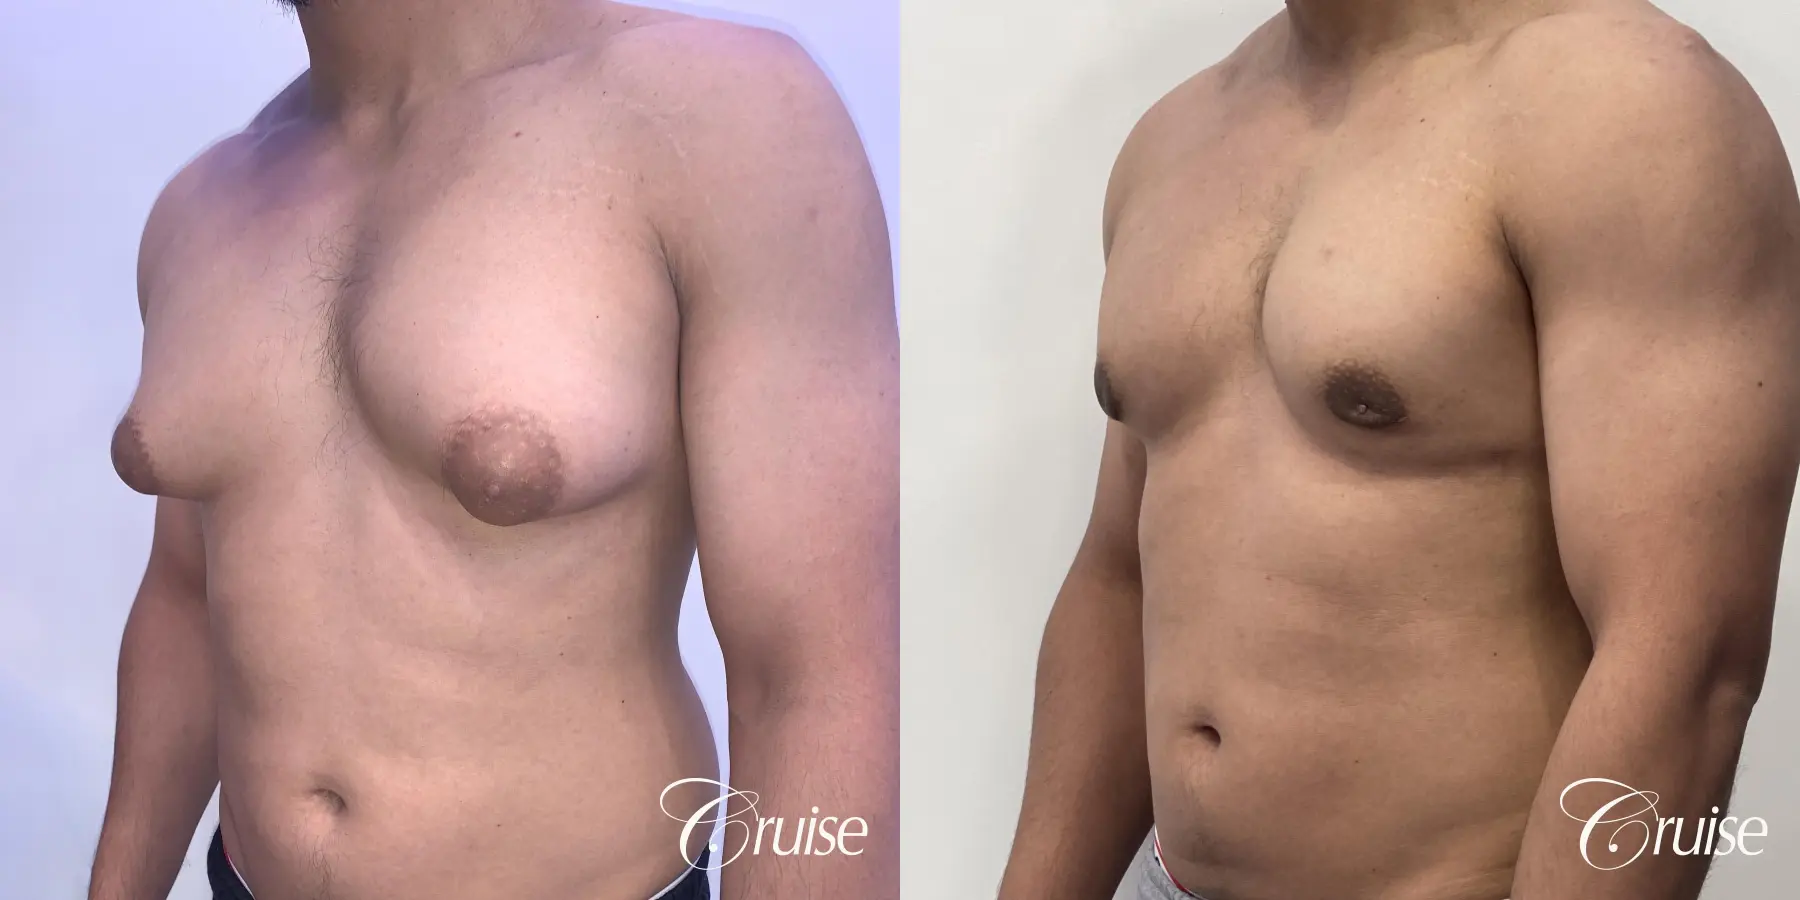 gynecomastia surgery - Before and After 3